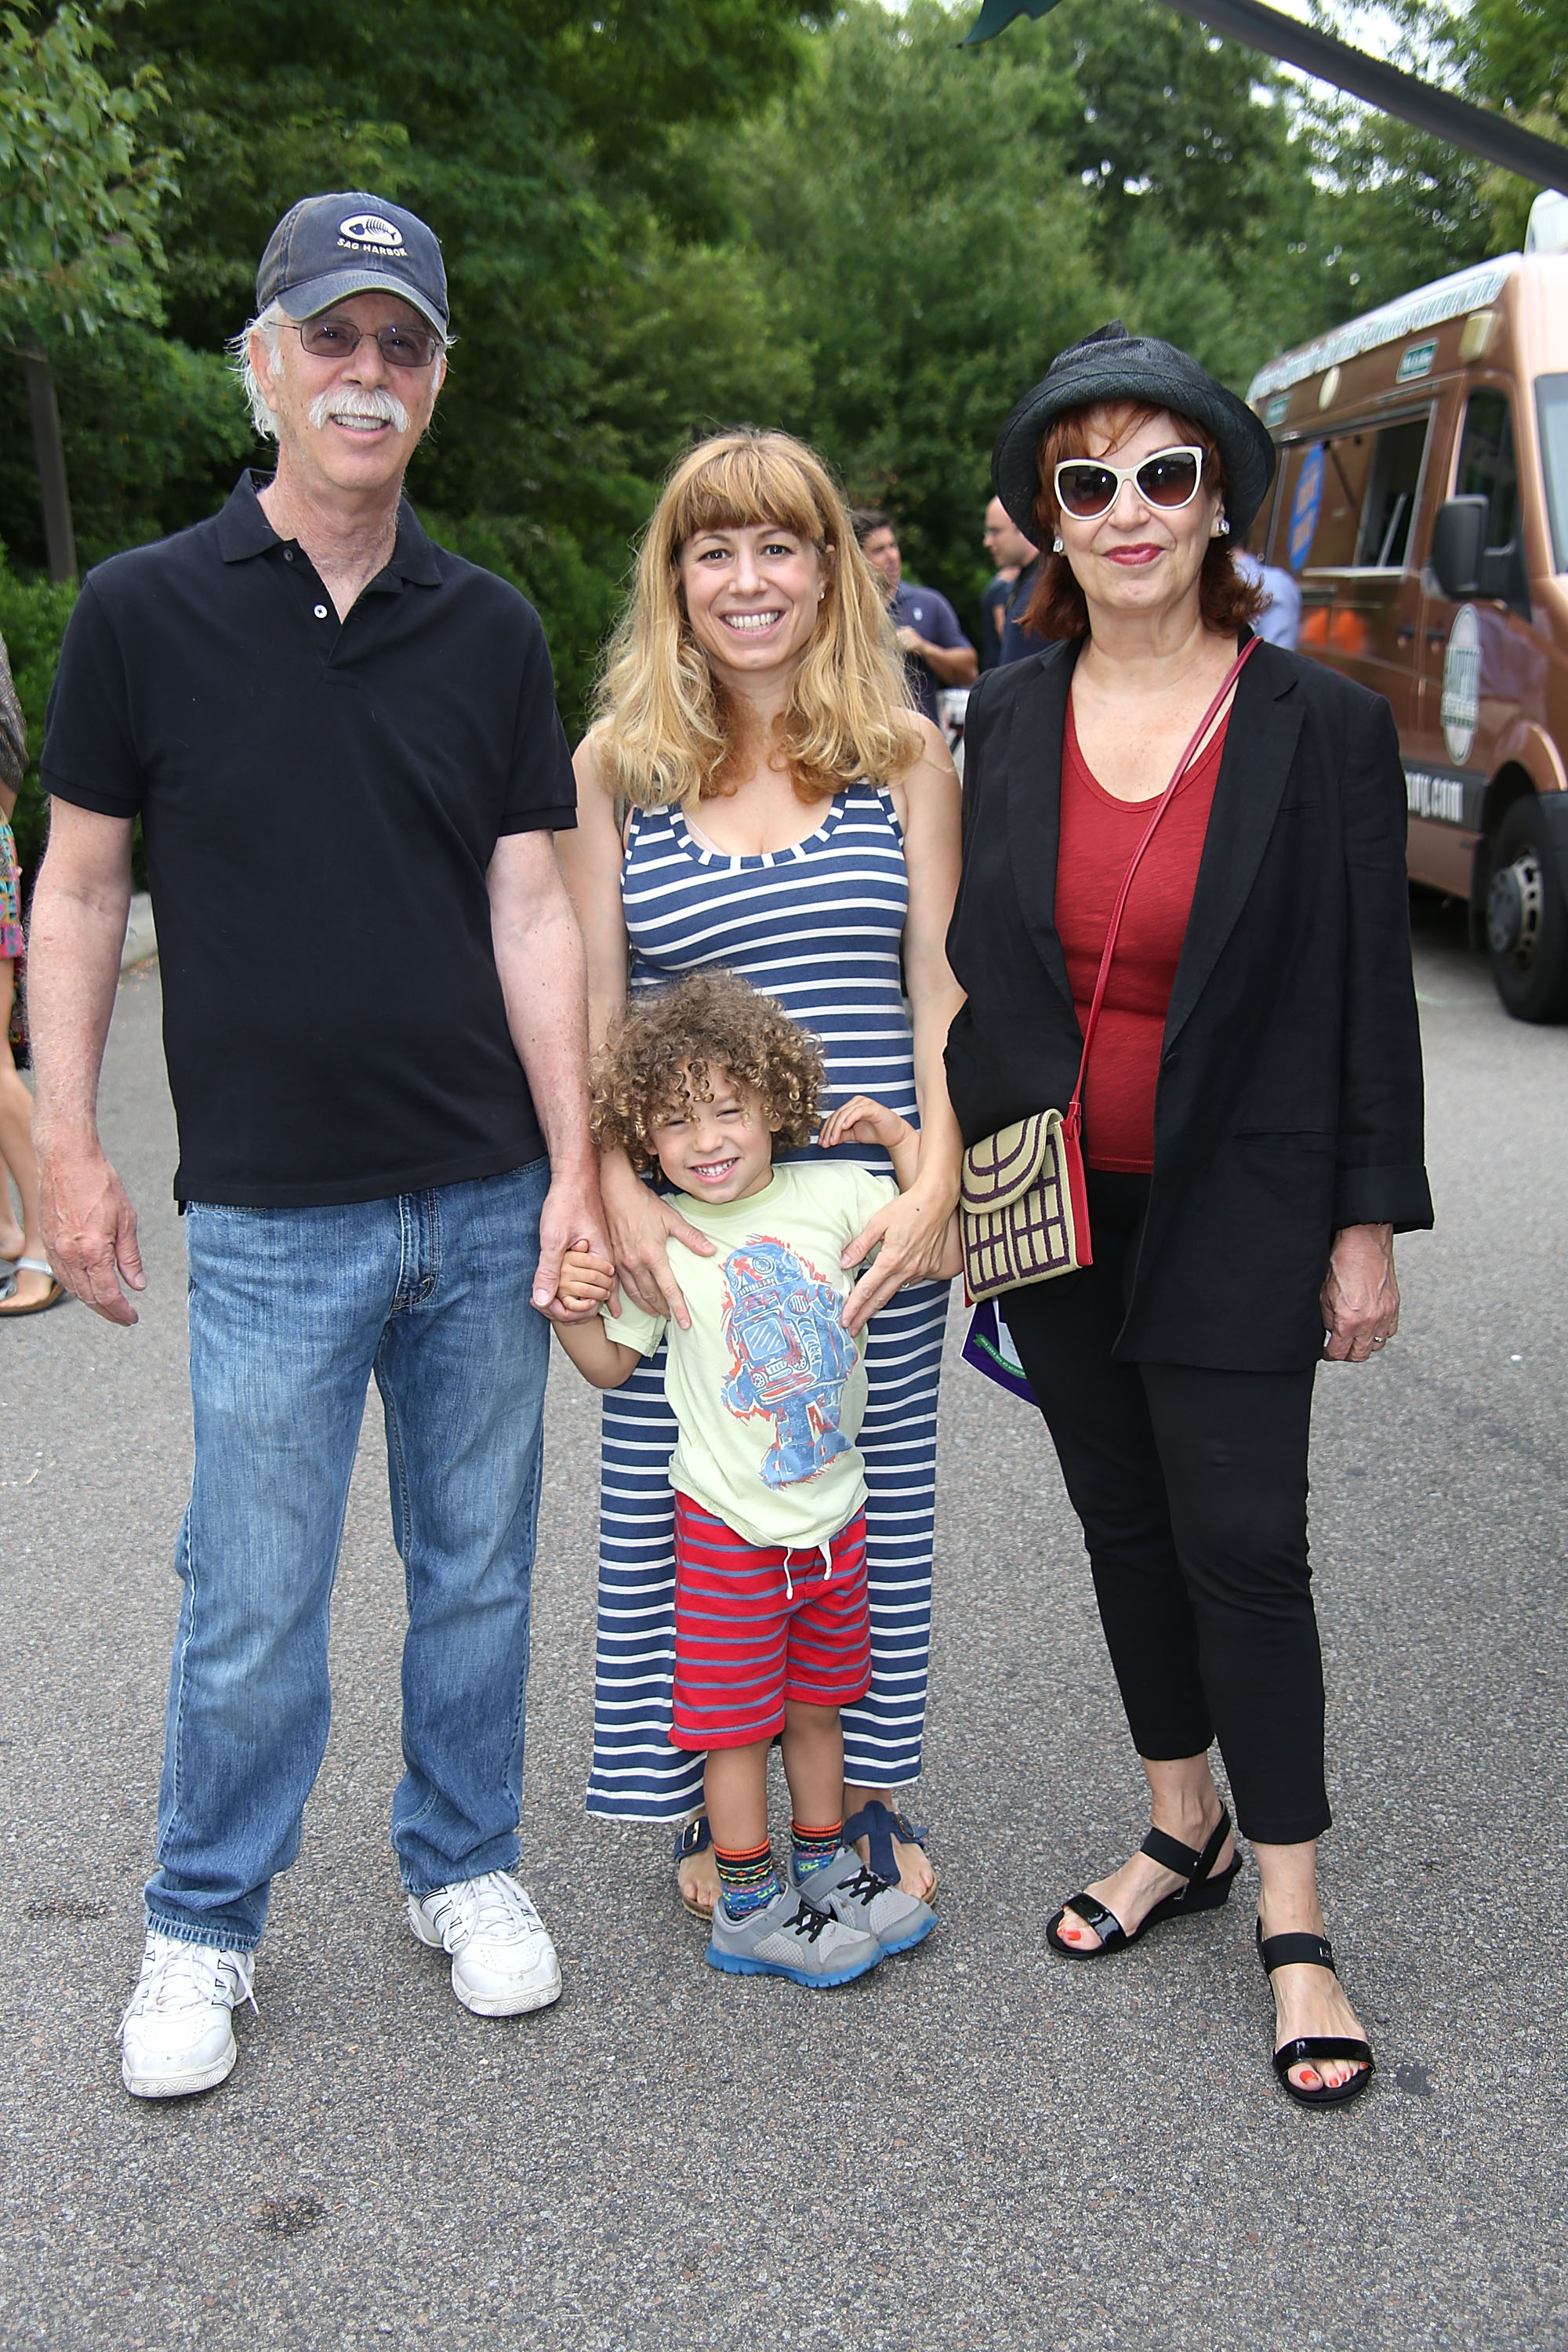 Steve Janowitz, Eve Behar, Luca Scotti, and Joy Behar at the 6th Annual Family Affair at Childrens Museum of the East End on July 19, 2014 in Bridgehampton, New York | Source: Getty Images